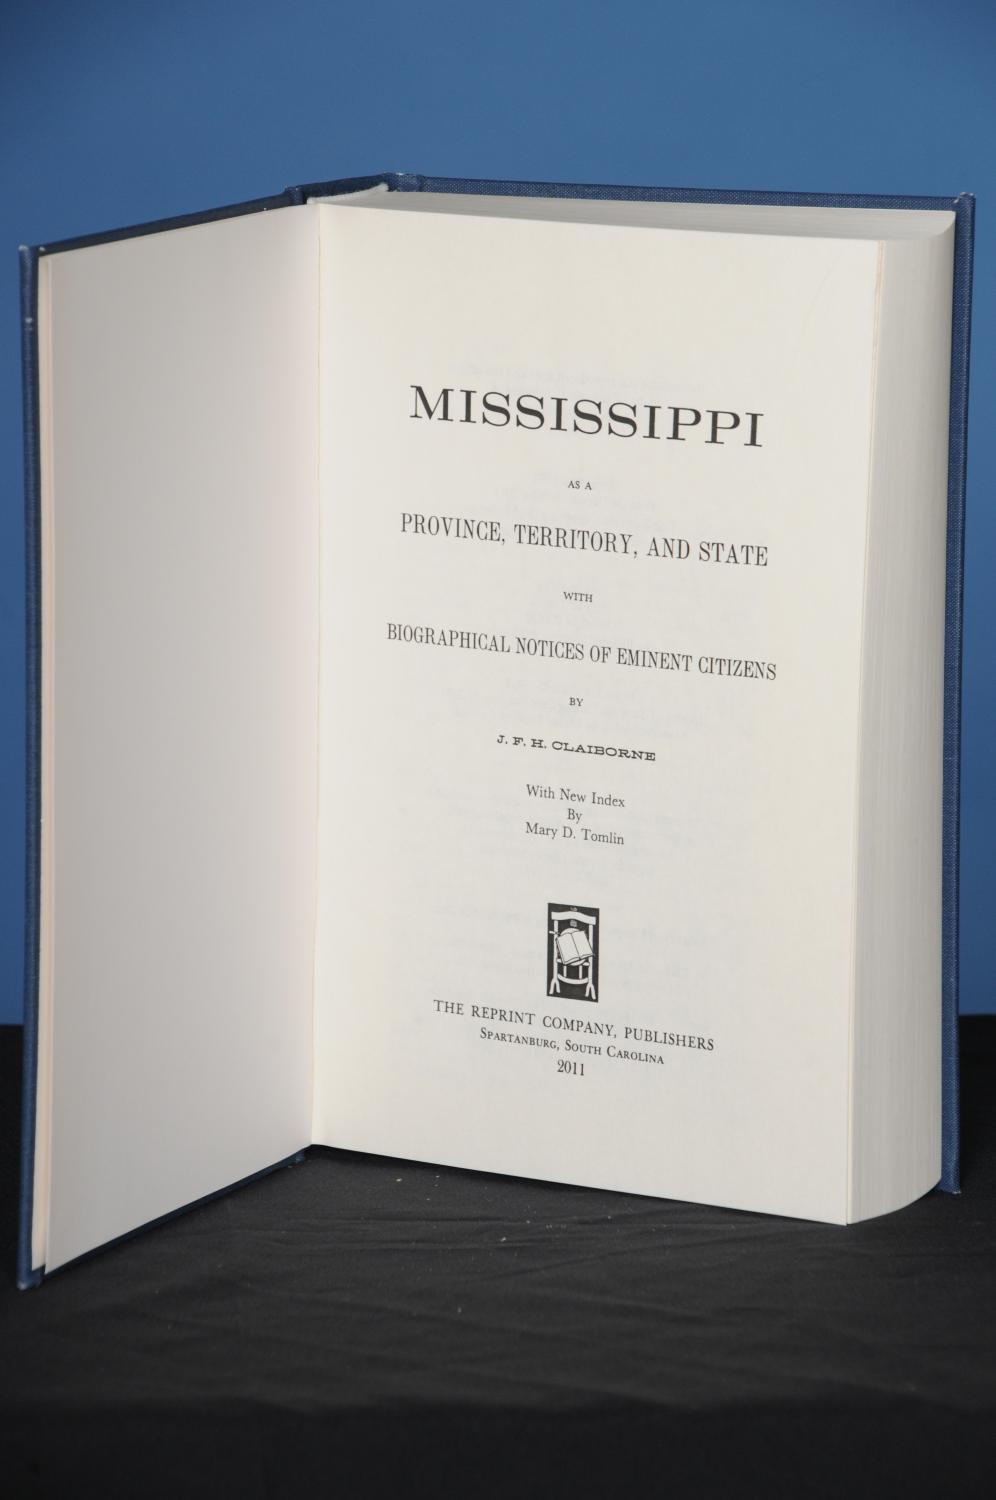 Mississippi As a Province Territory and State